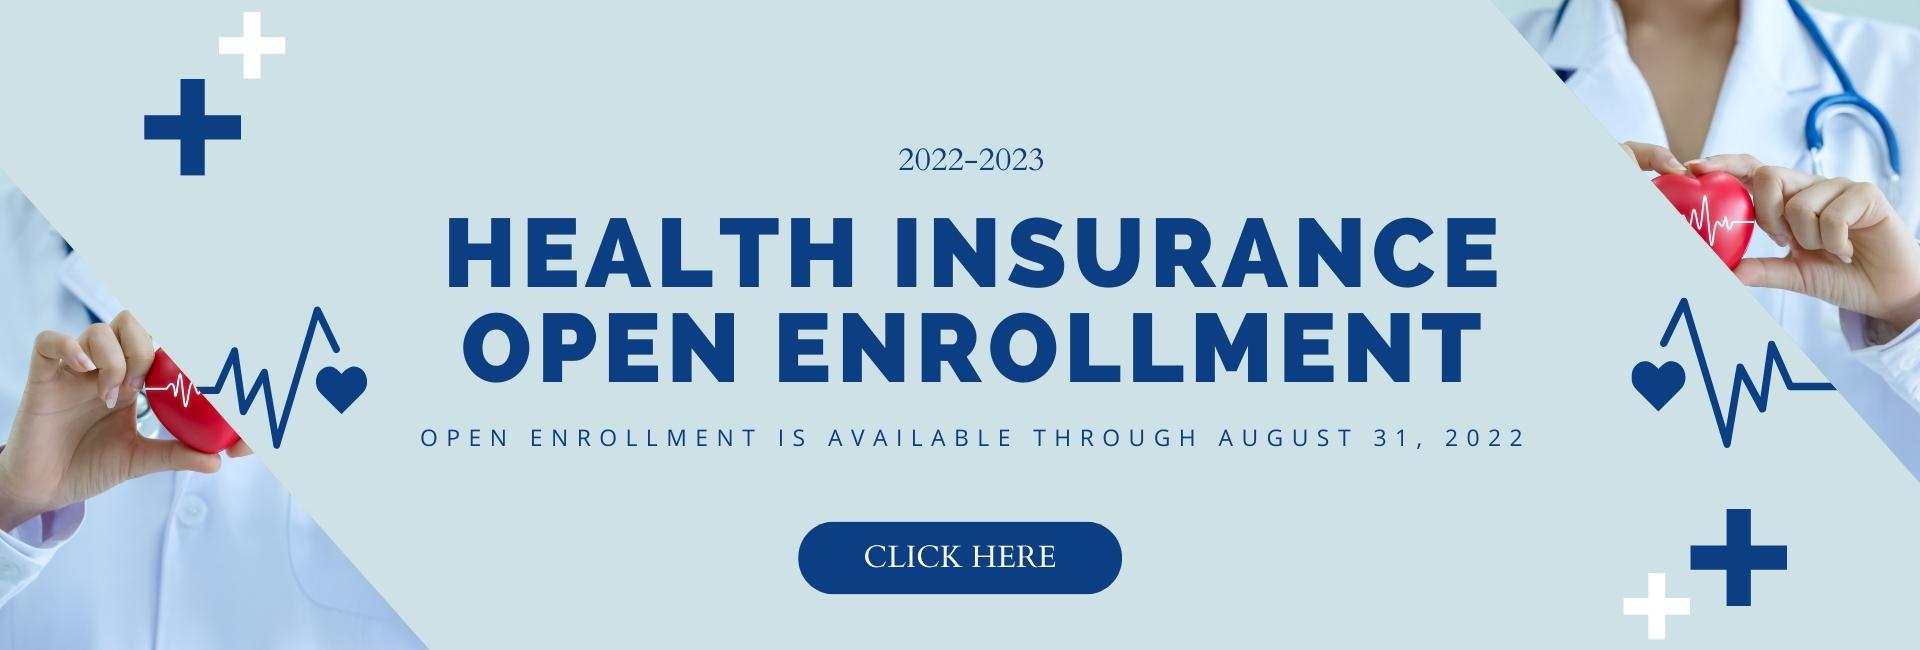 Health Insurance Open Enrollment Now Available banner